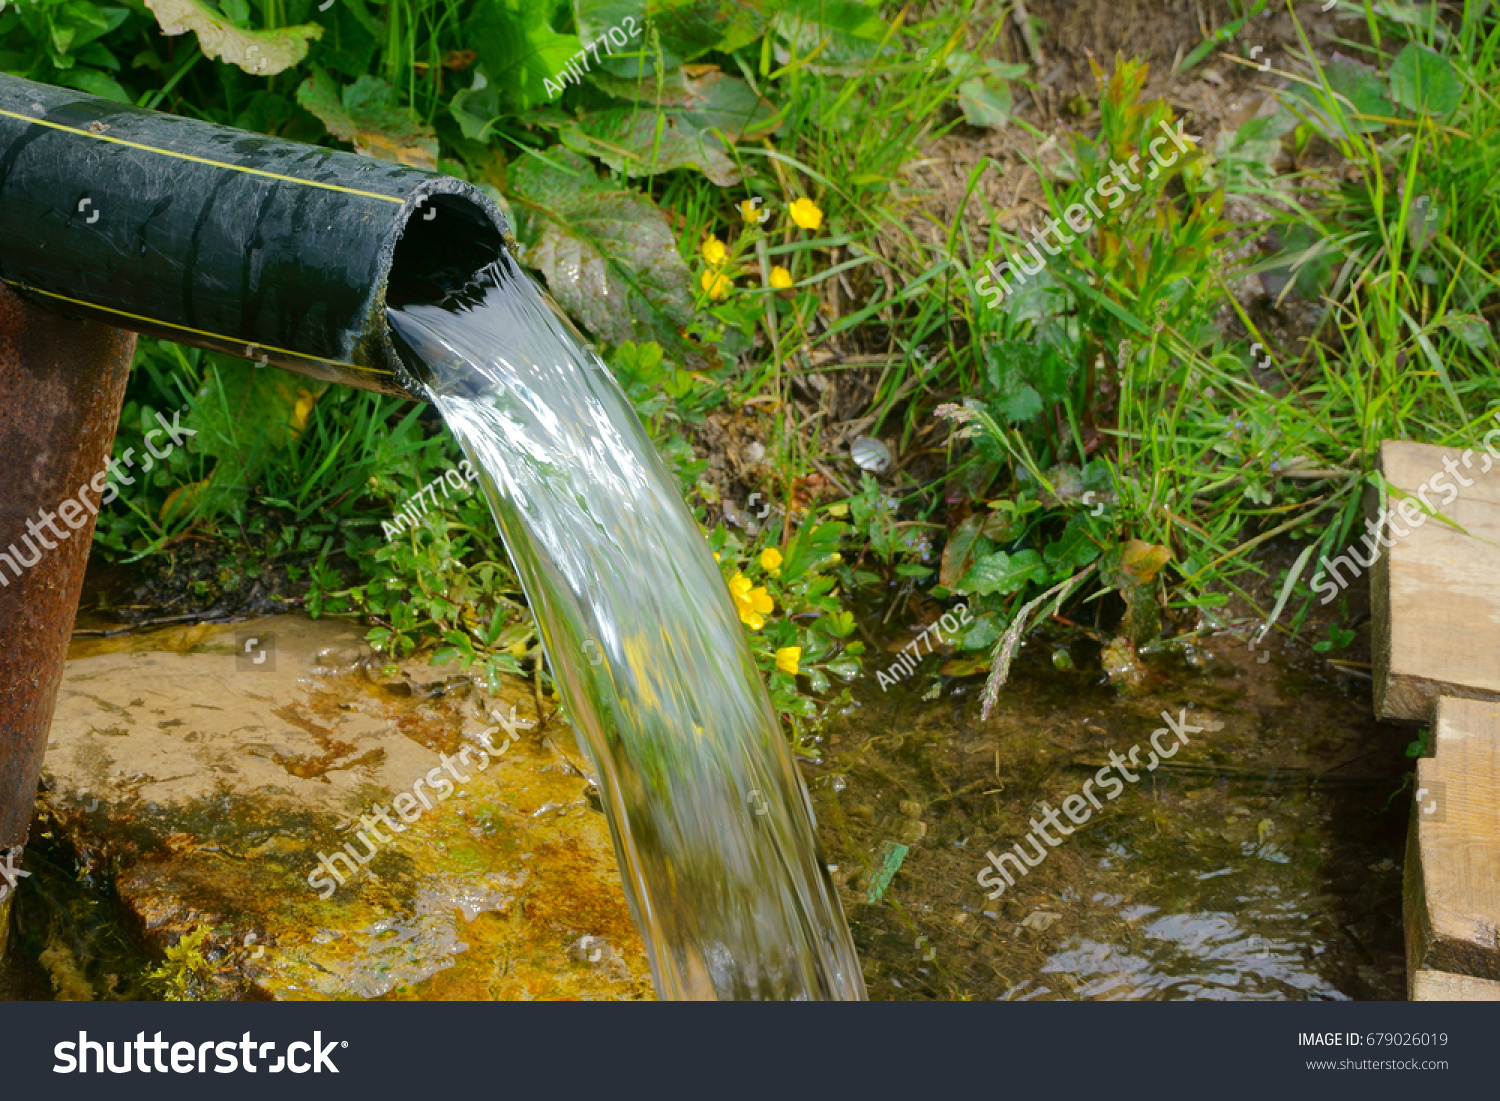 Pure Water Flows Pipe Water Source Stock Photo 679026019 Shutterstock